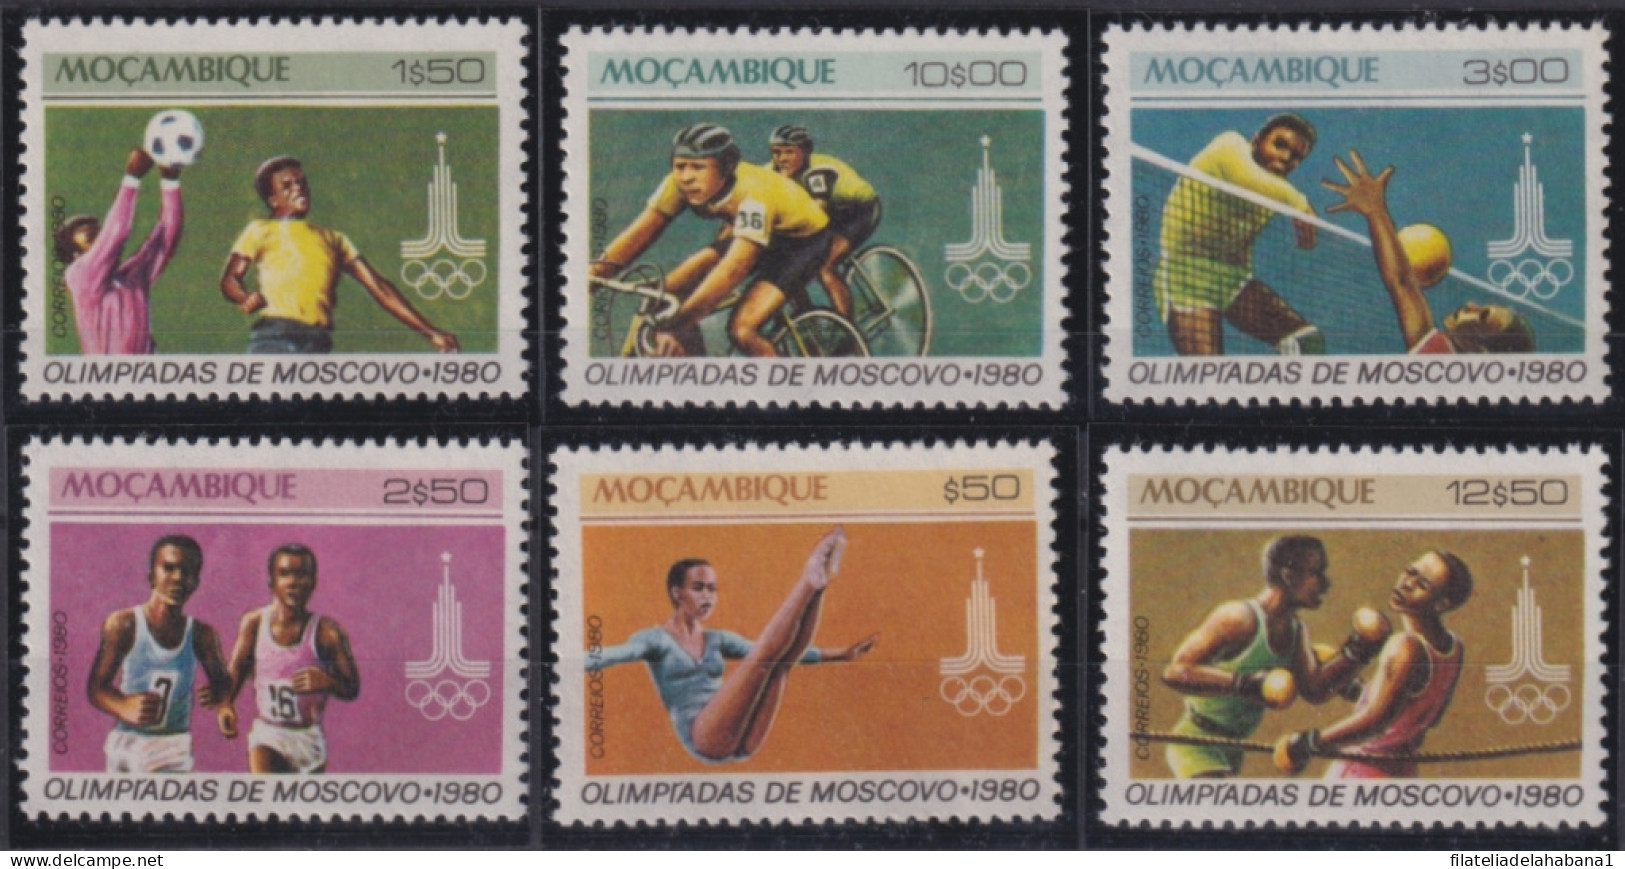 F-EX50250 MOZAMBIQUE MNH 1980 OLYMPIC GAMES MOSCOW CYCLING BOXING ATHLETISM BASKET.  - Sommer 1980: Moskau